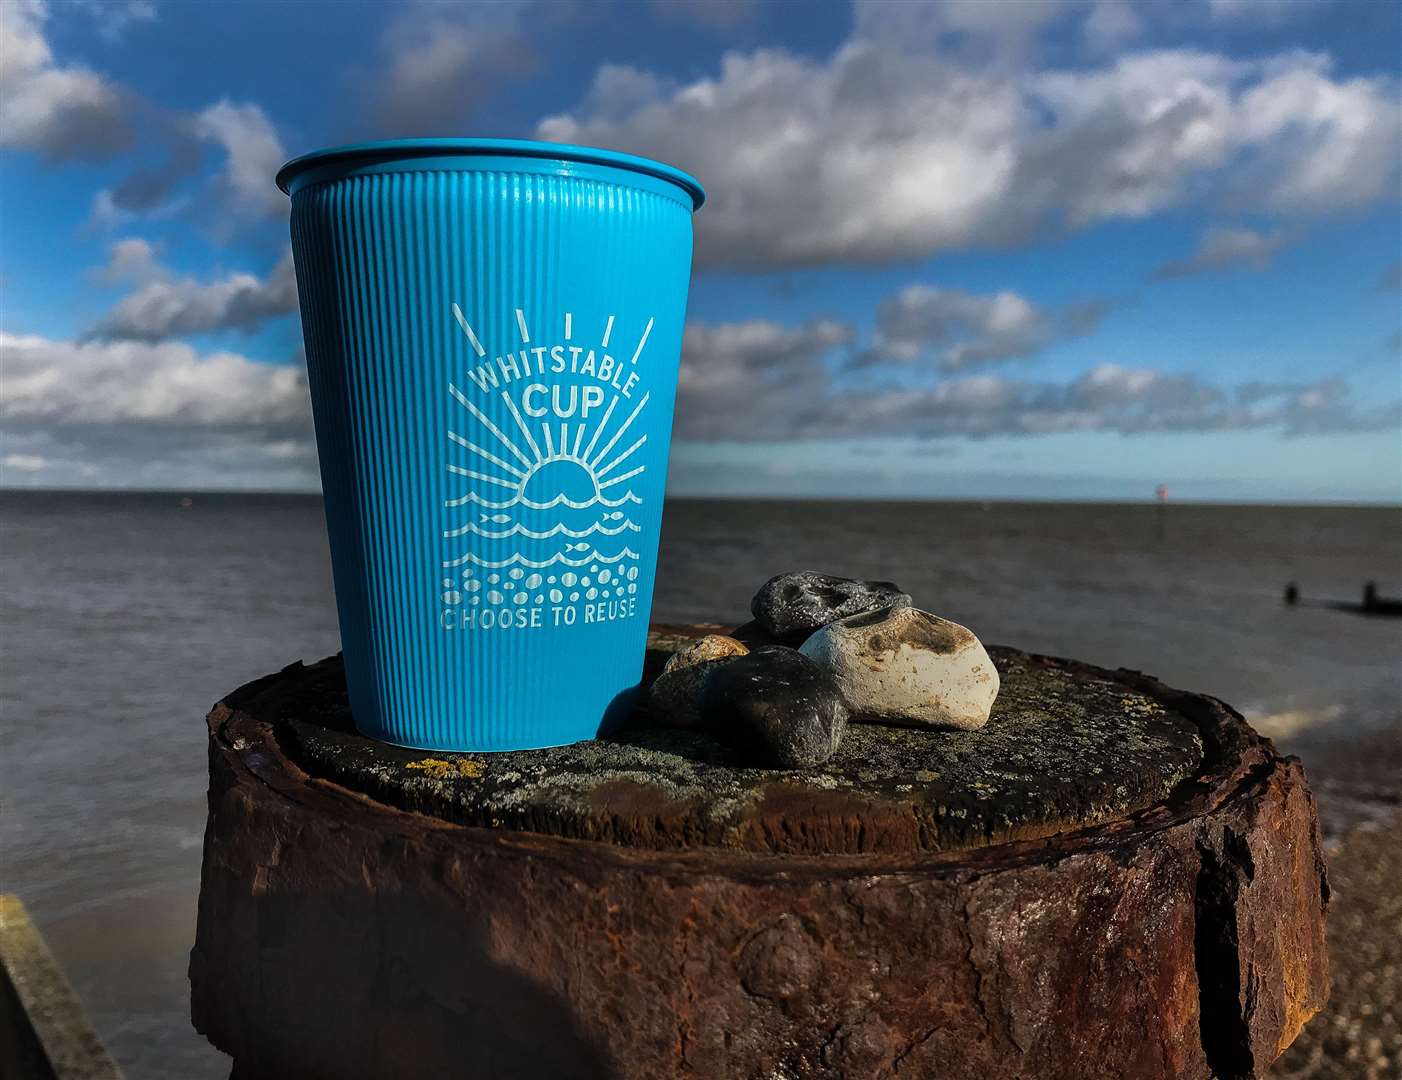 The Plastic Free Whitstable group developed their own reusable cup. Picture: Plastic Free Whitstable